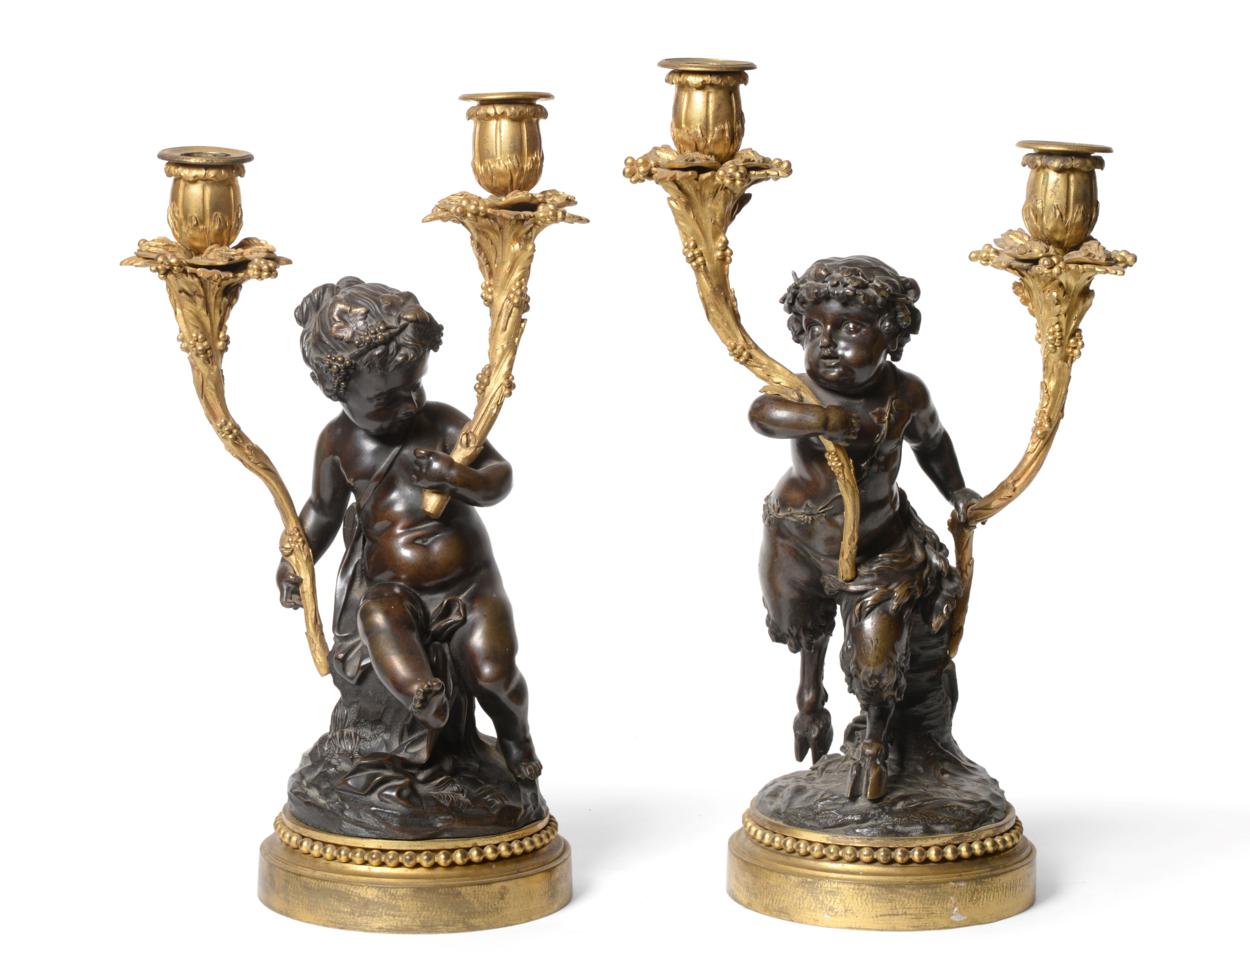 Lot 265 - A Pair of French Gilt and Patinated Bronze Candelabra, late 19th century, after a model by...